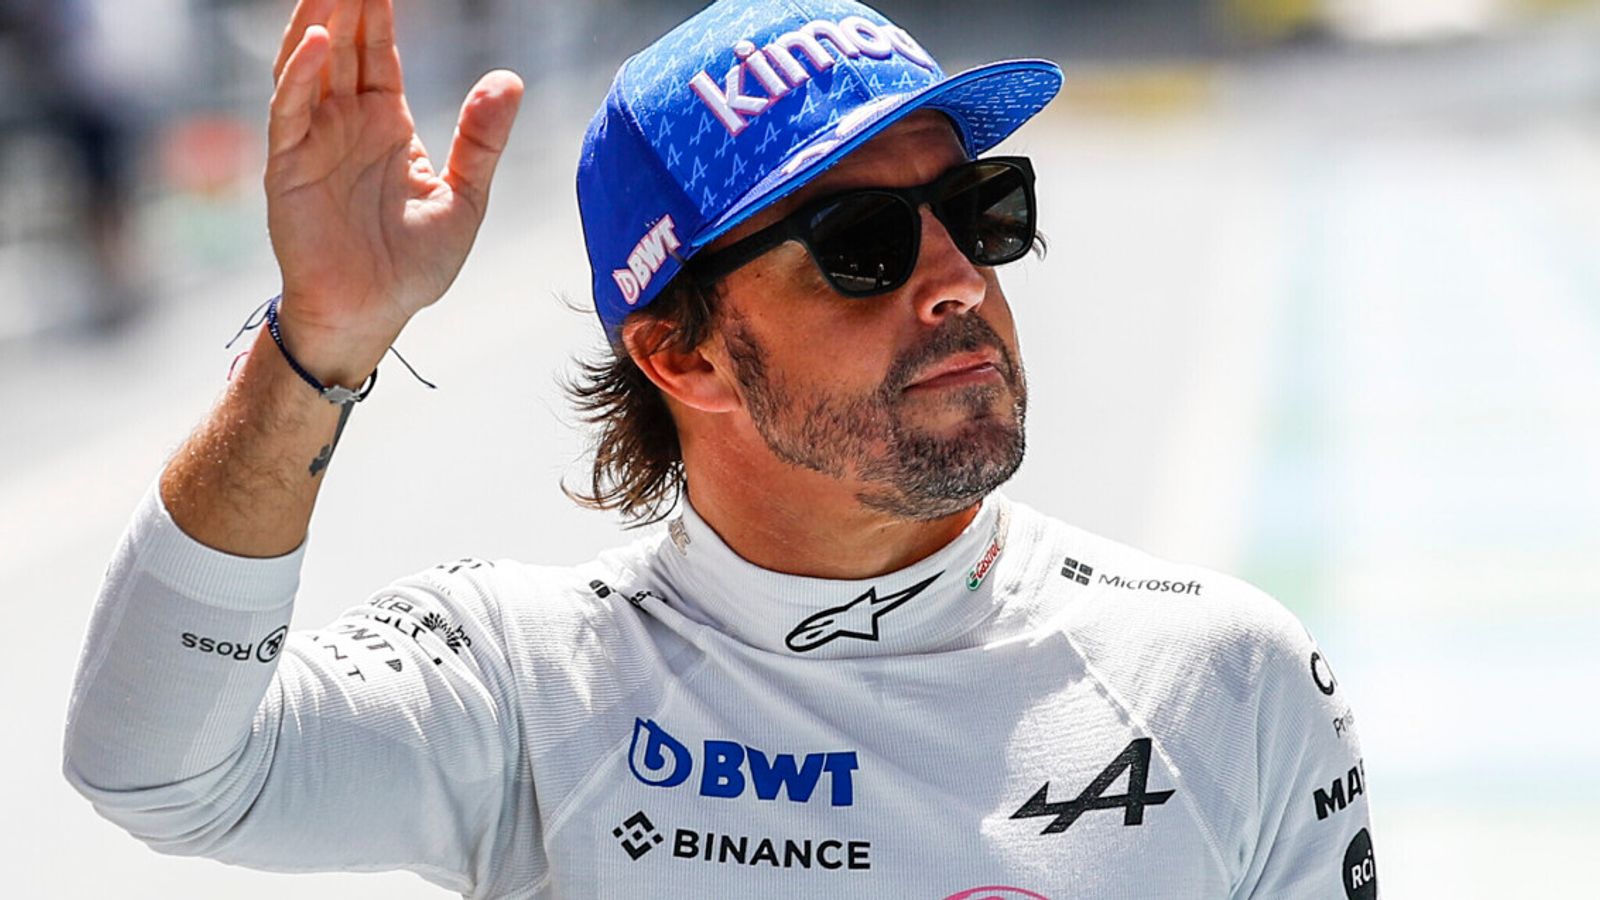 At what point do you think Fernando Alonso will lose faith in Aston Martin  and consider retiring? - Quora